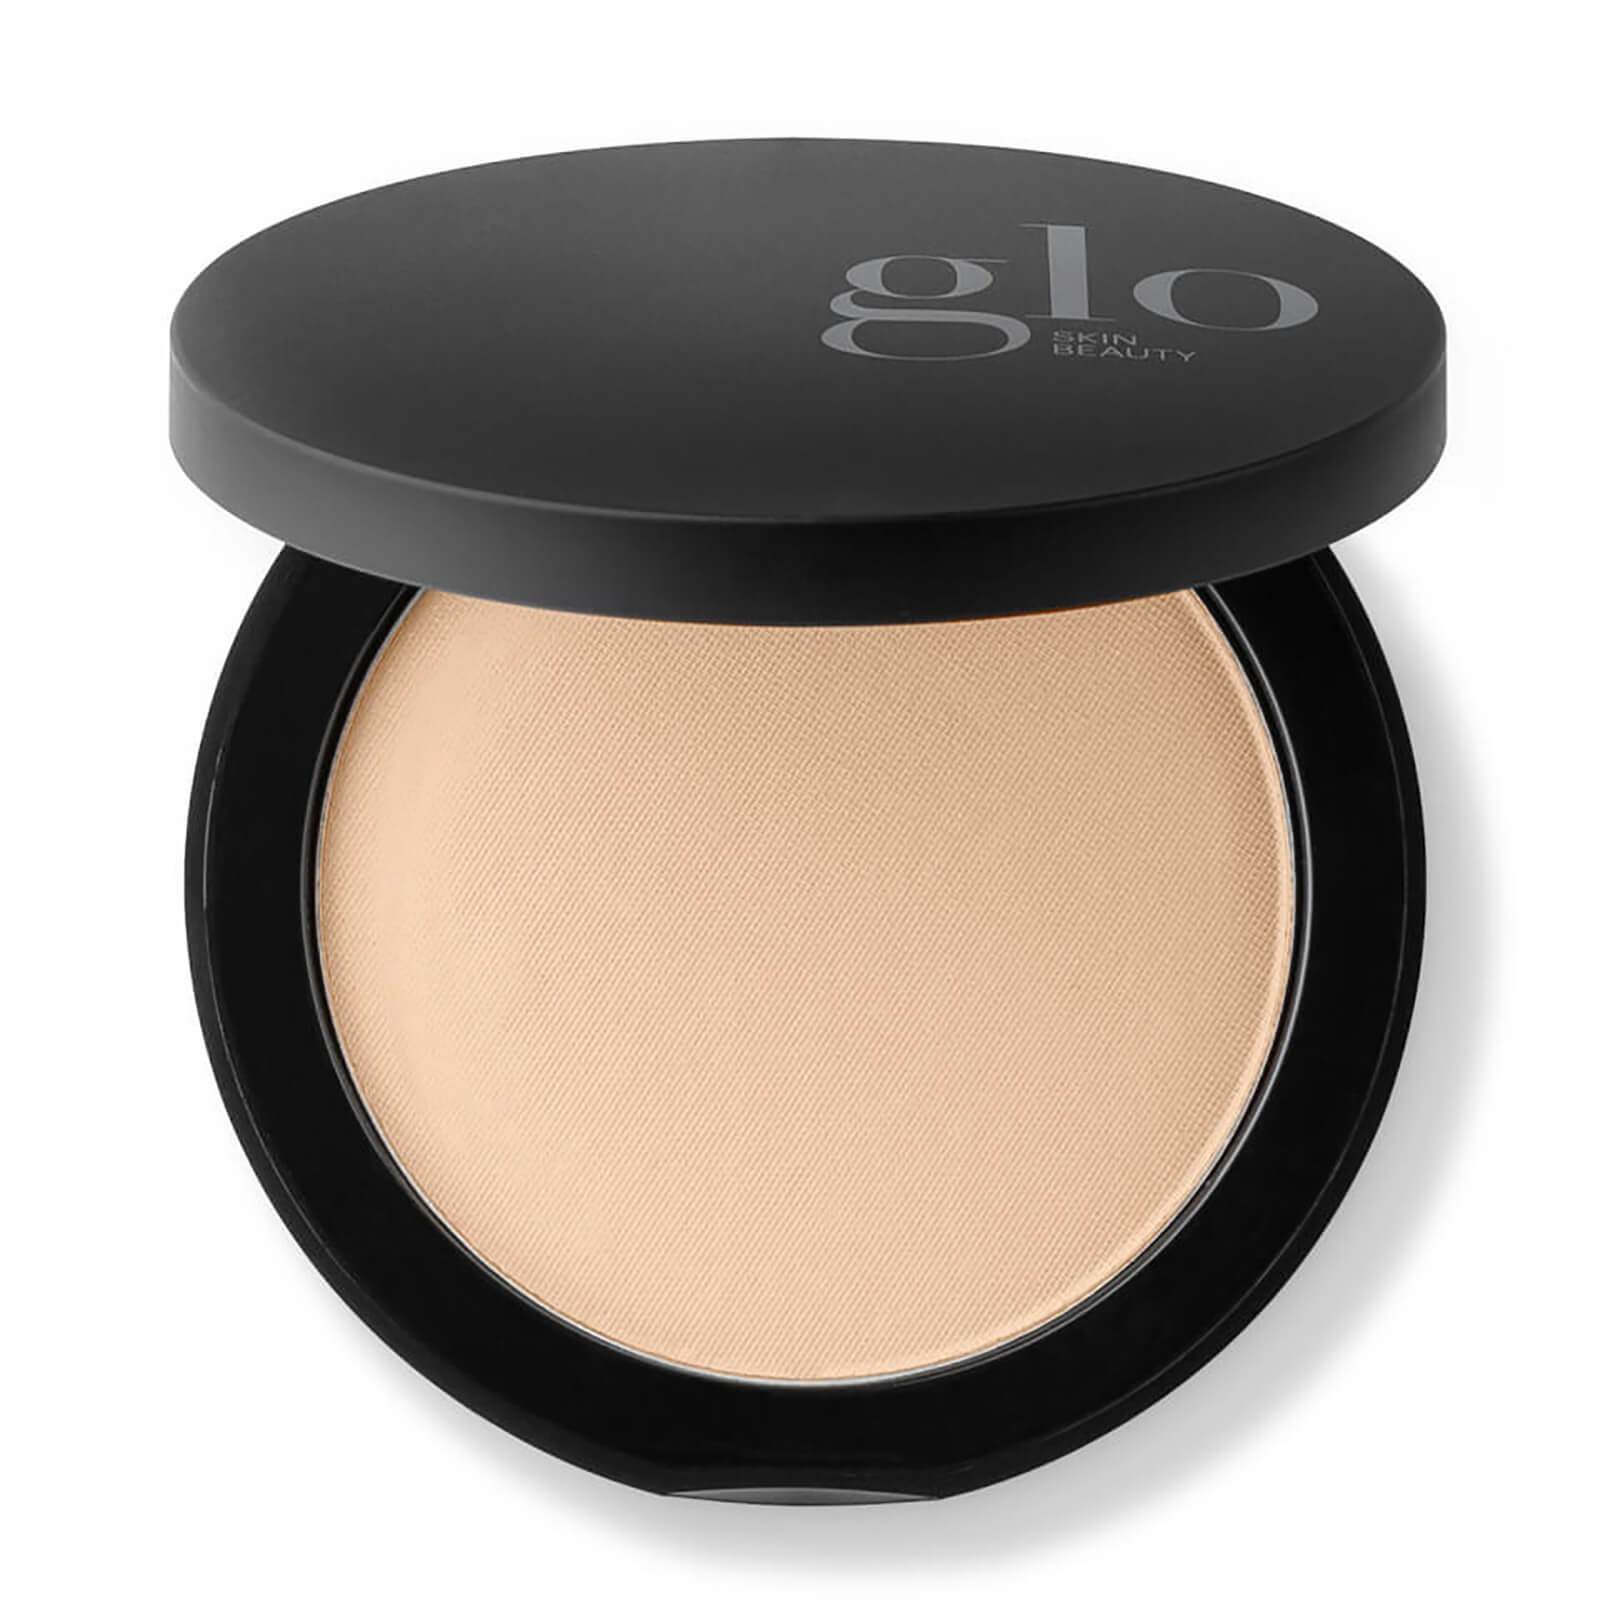 Glo Skin Beauty Pressed Base Powder Foundation (0.35 Oz.) In Natural Light